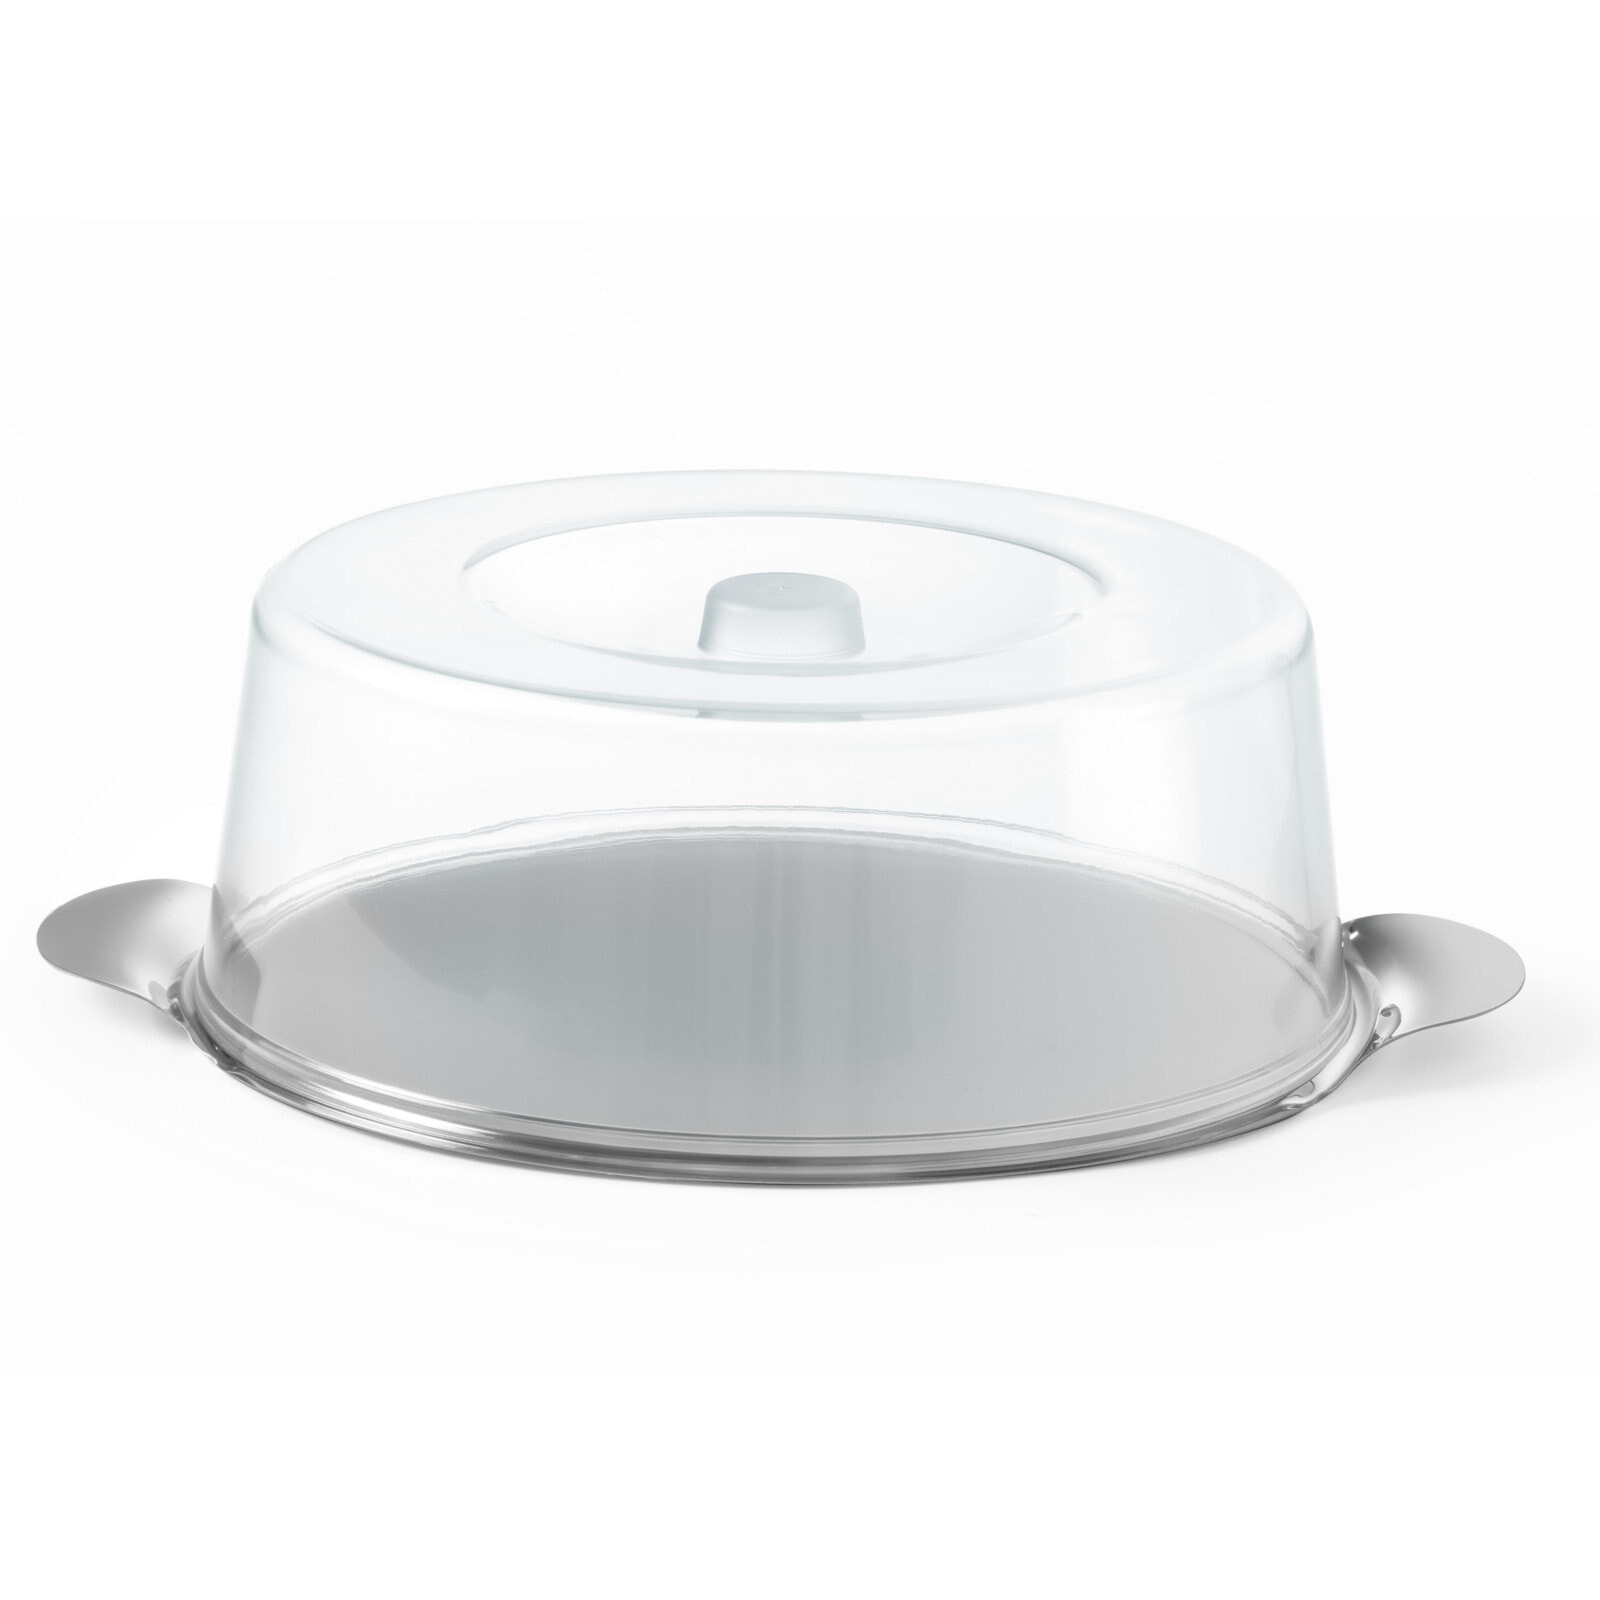 Stainless steel tray with a transparent lid, round dia. 300mm - Hendi 980101